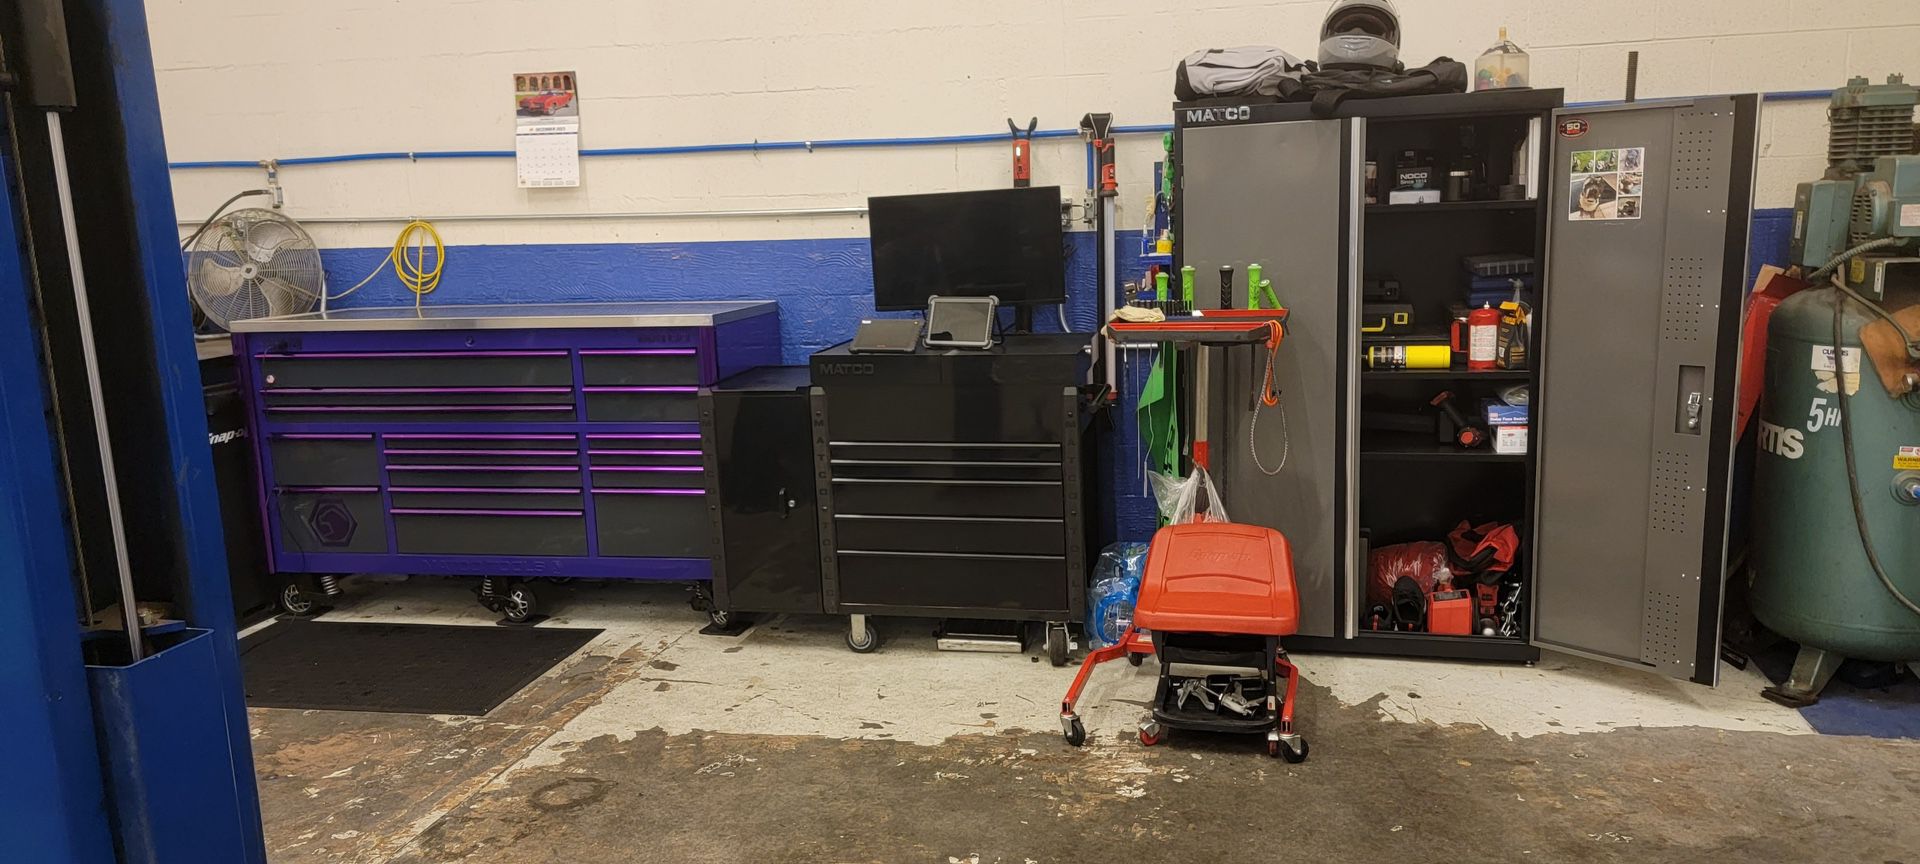 Matco Tool Box With Side Locker And TV